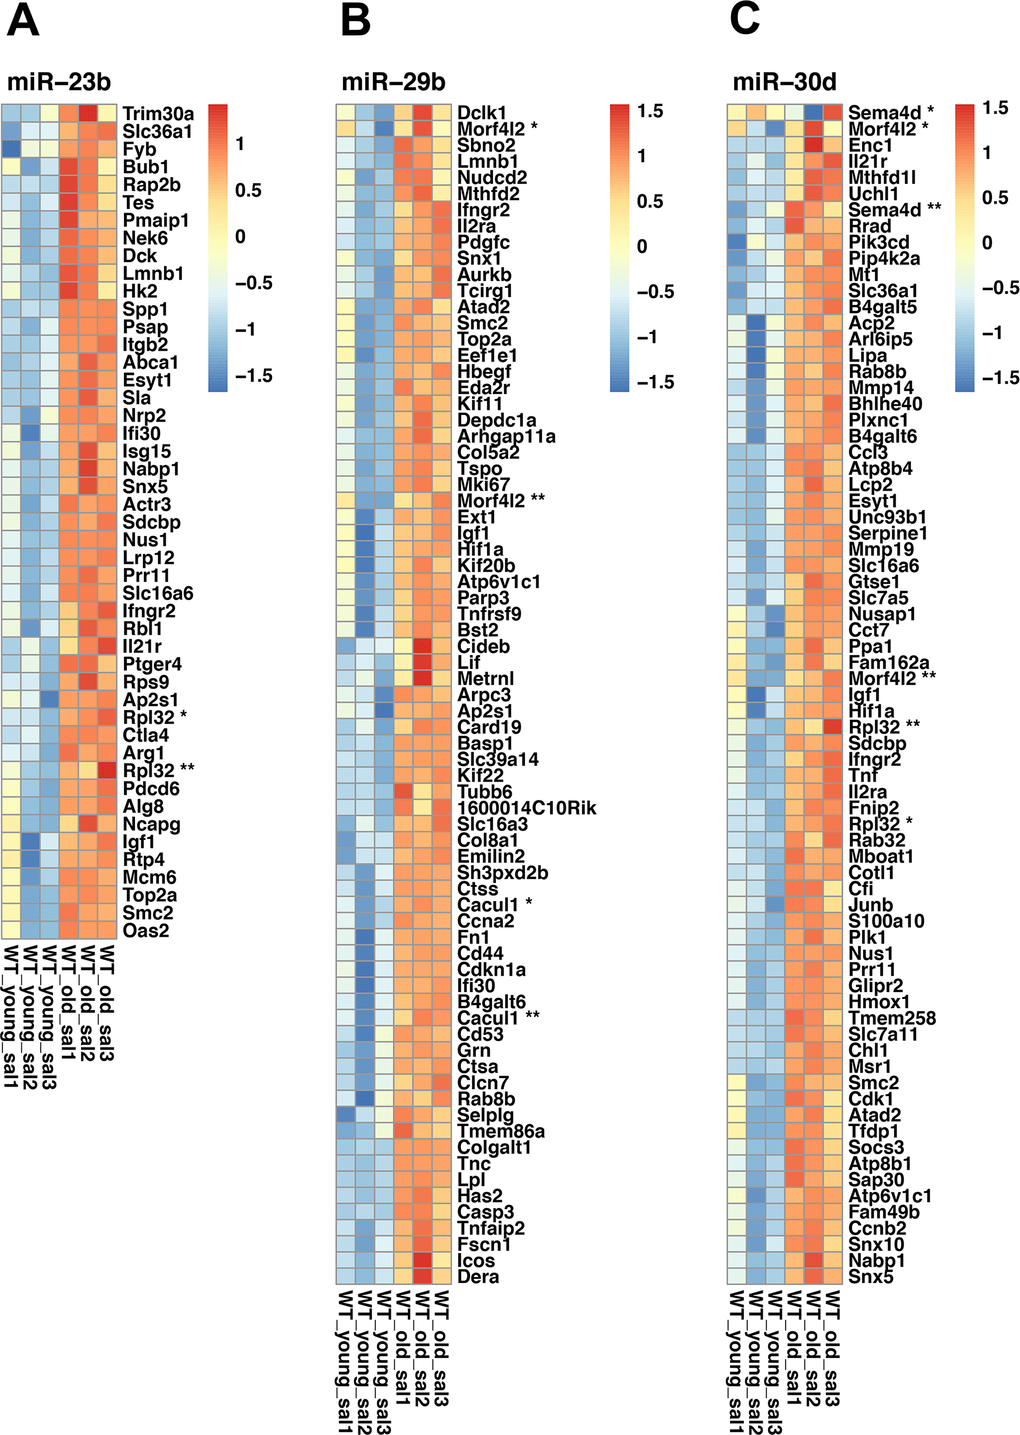 Heatmaps of selected miRNAs. (A) Heatmap of miR-23b differentially expressed target genes. (B) Heatmap of miR-29b differentially expressed target genes. (C) Heatmap of miR-30d differentially expressed target genes. Red indicates high expression, and blue, low expression. When duplicated, genes were marked with asterisks. Affymetrix probes IDs are shown inside the parenthesis. Rpl32 * (17469936), Rpl32 ** (17549432), Cacul1 * (17366081), Cacul (17548127), Morf4l2 * (17544754), Morrf4l2 ** (17548112), Morf4l2 * (17544754), Morf4l2 **(17548112), Rpl32 *(17469936), Rpl32 **(17549432), Sema4d * (17292562), Sema4d ** (17292569).